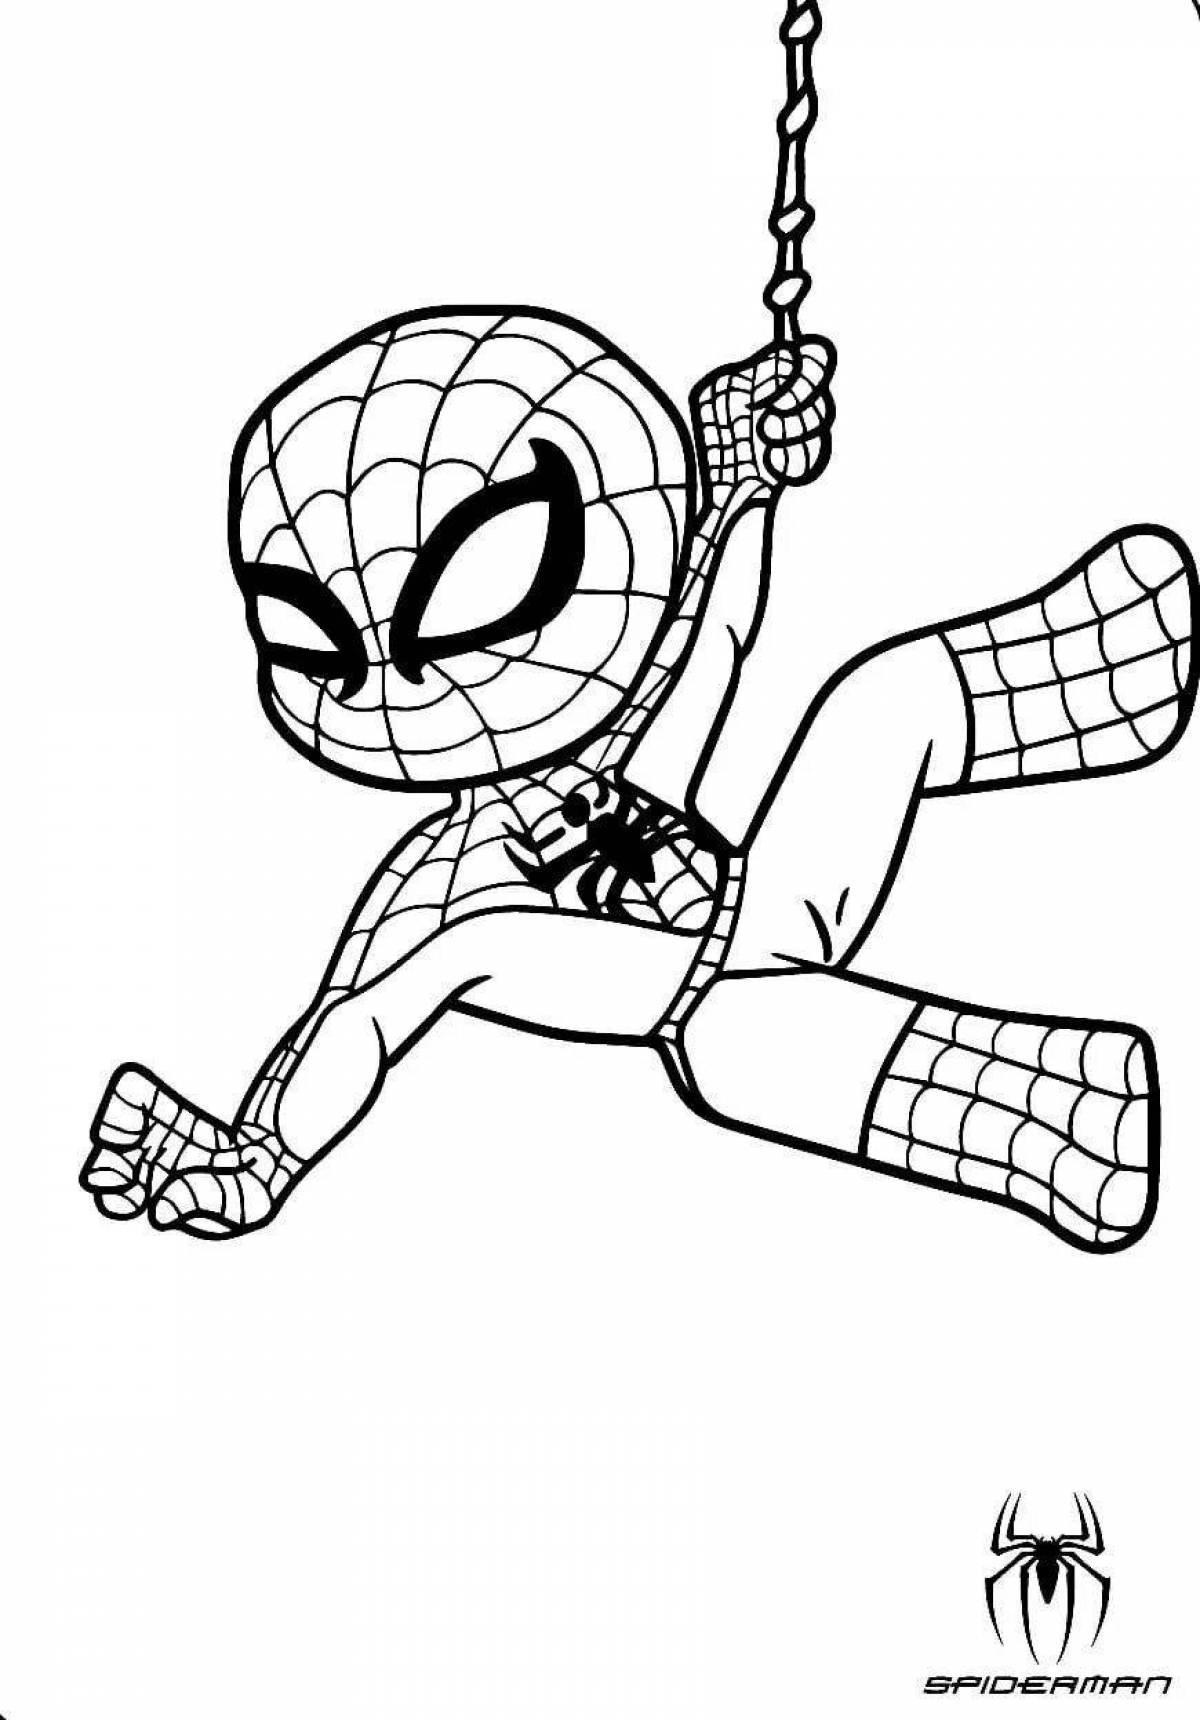 Dazzling Spiderman coloring pages for kids